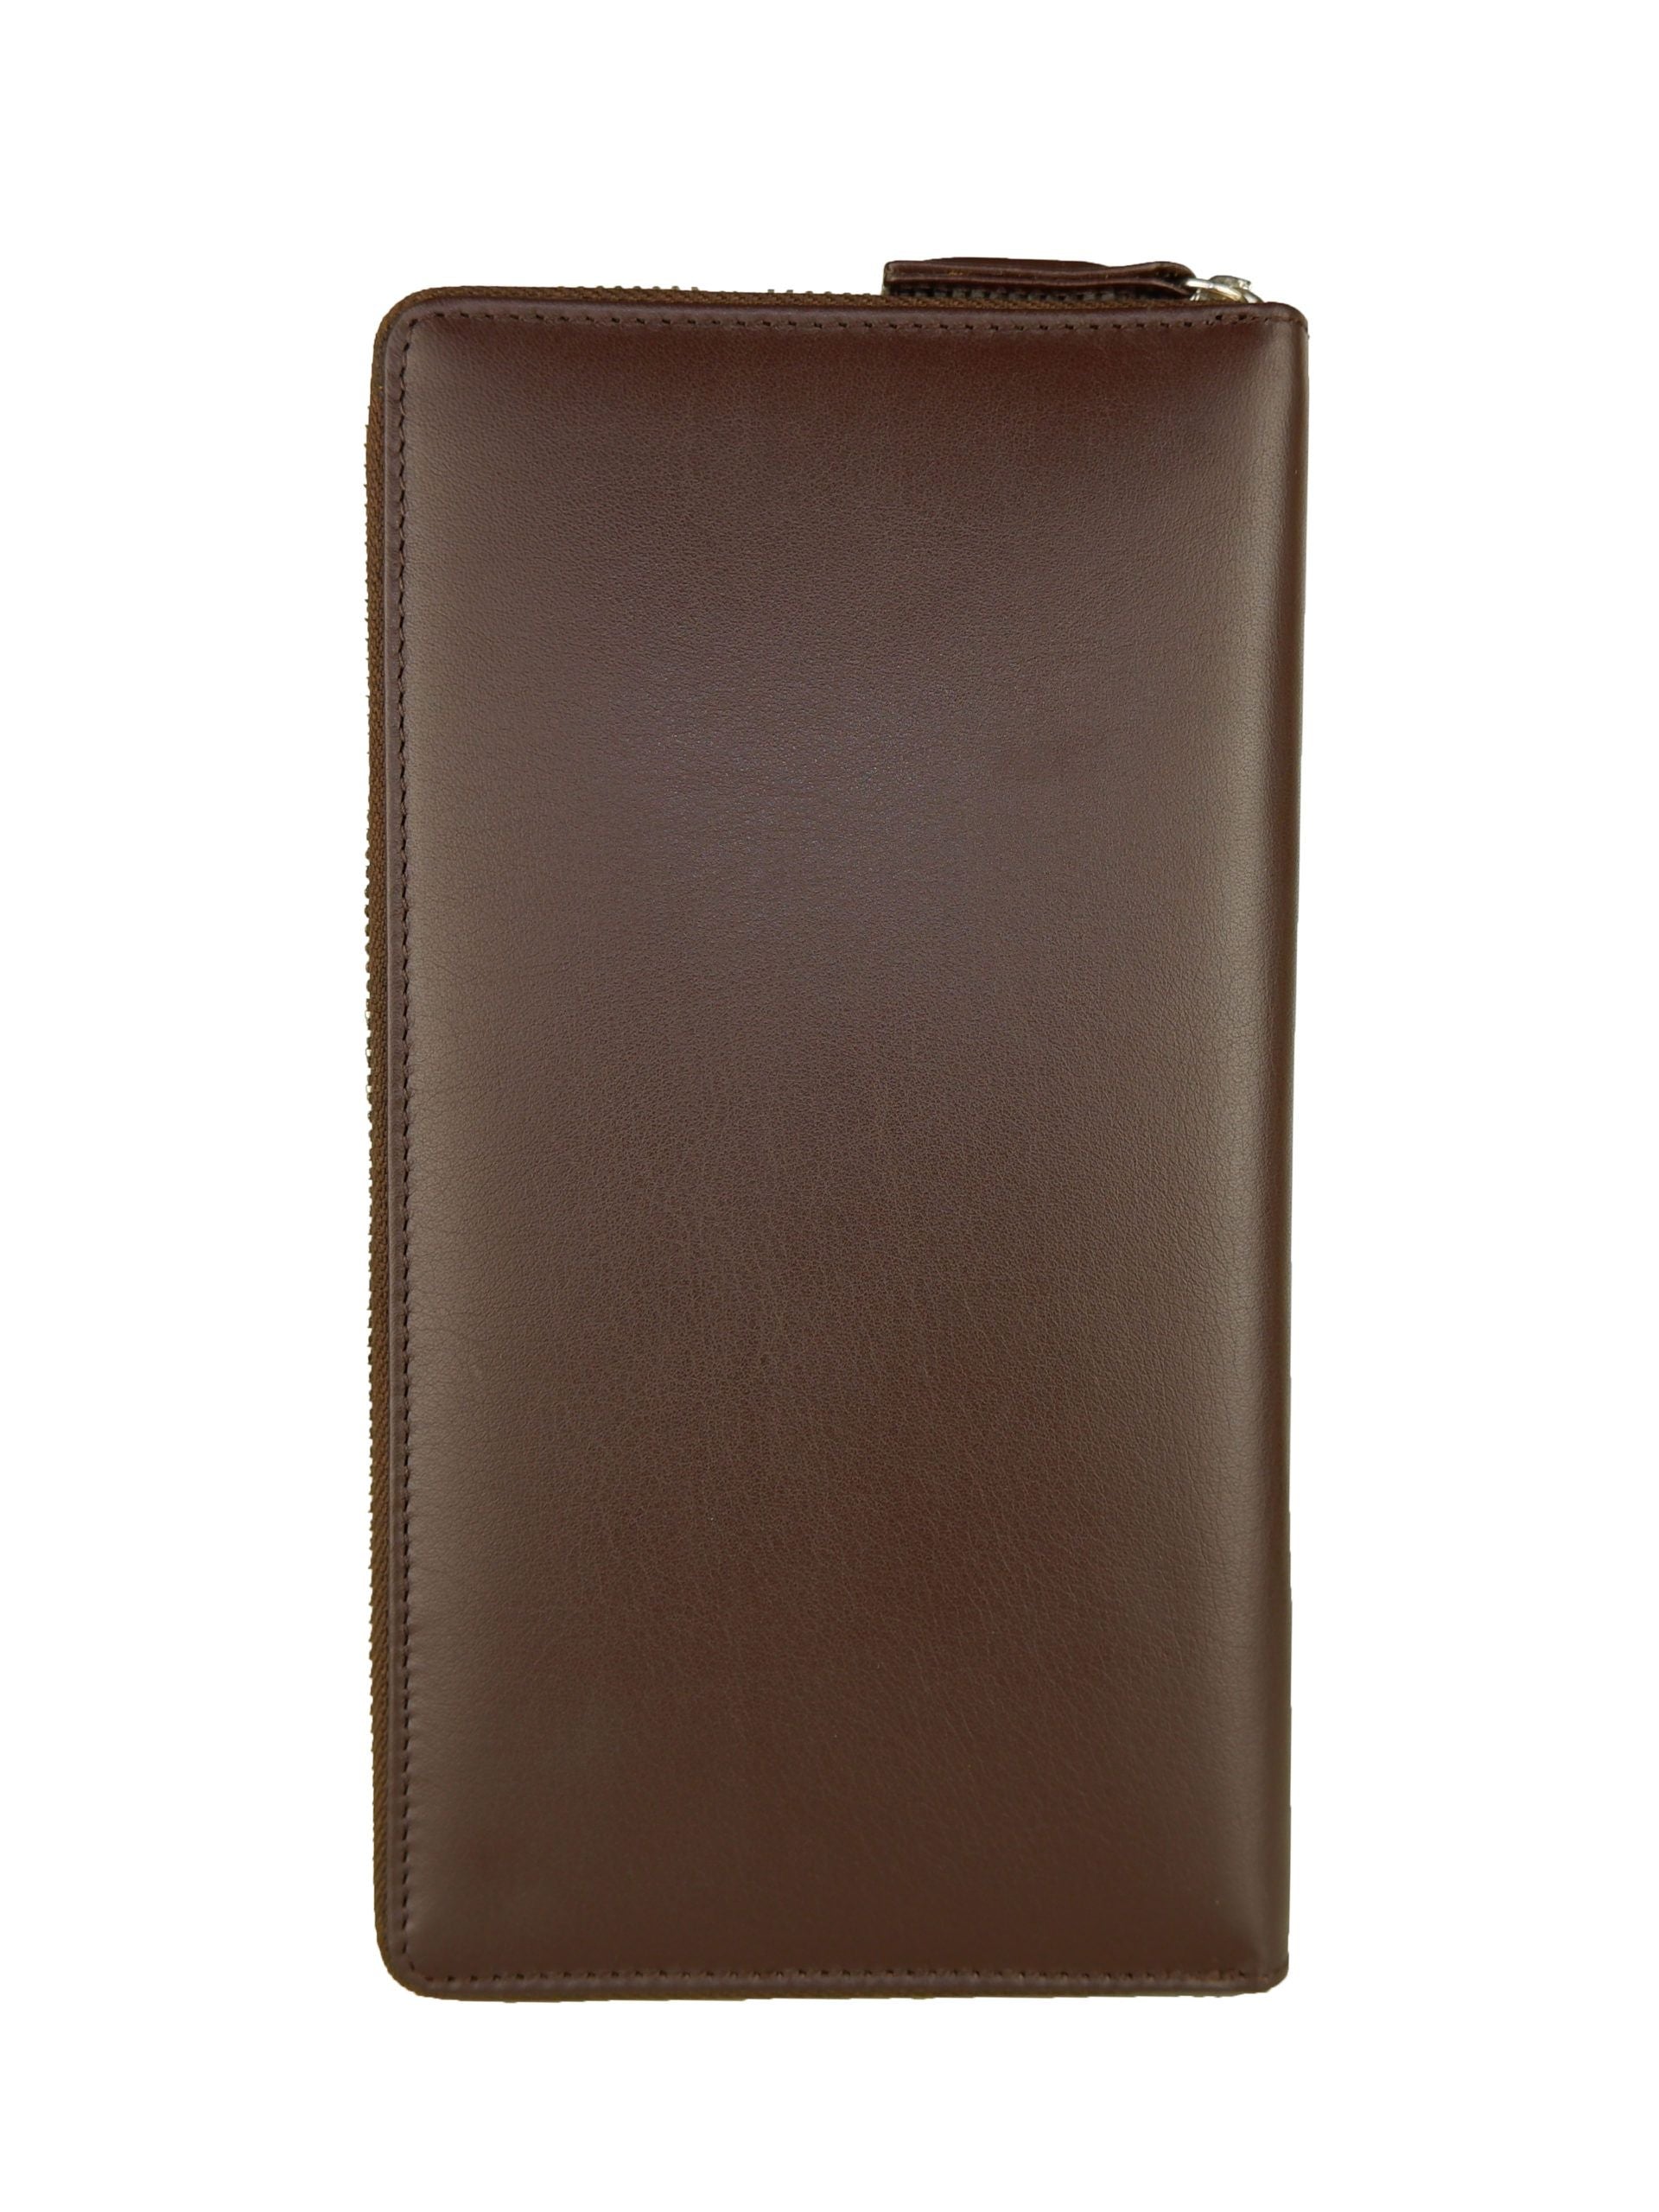 Sophisticated Brown Leather Wallet